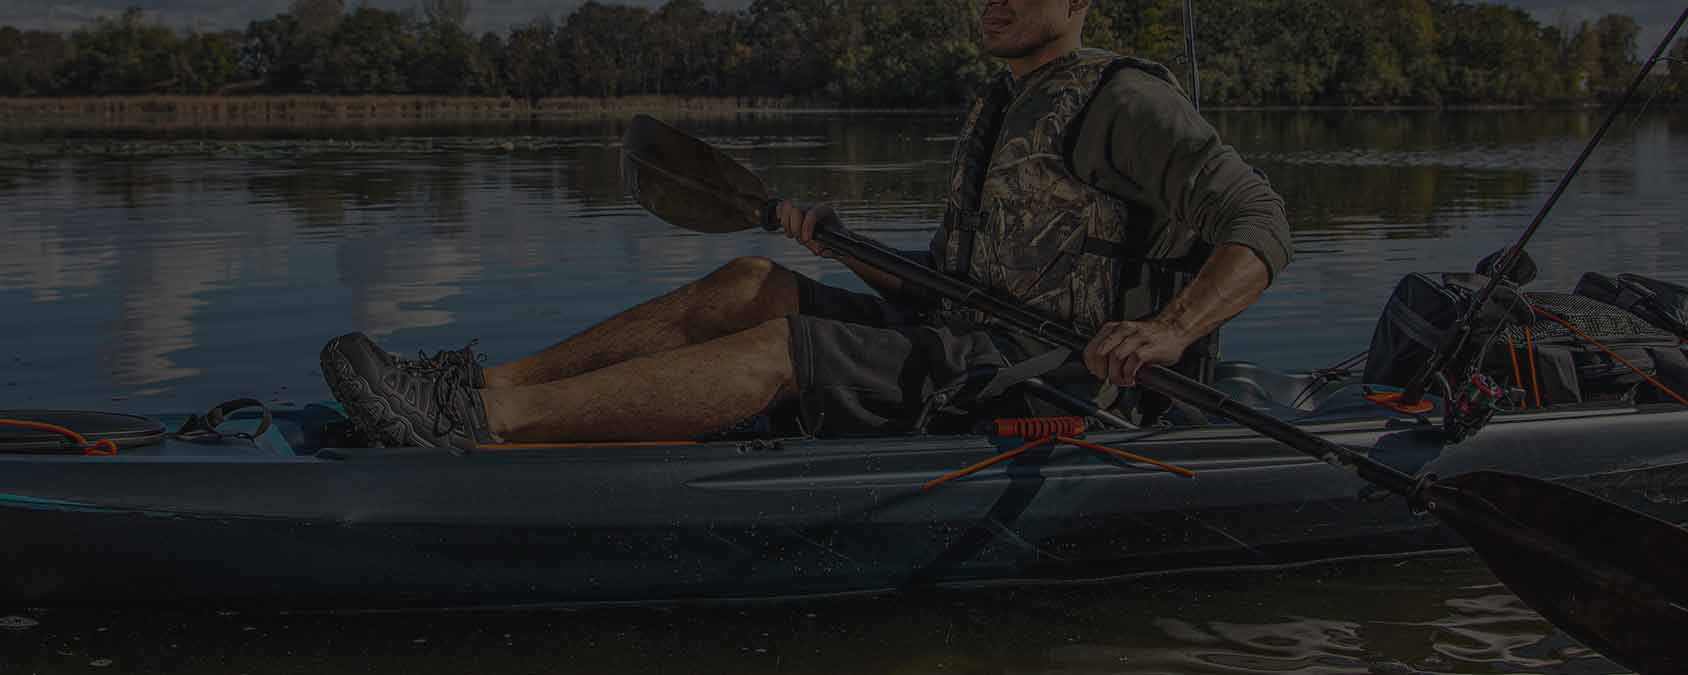 A man in a kayak with hunting gear and nice outdoor shoes